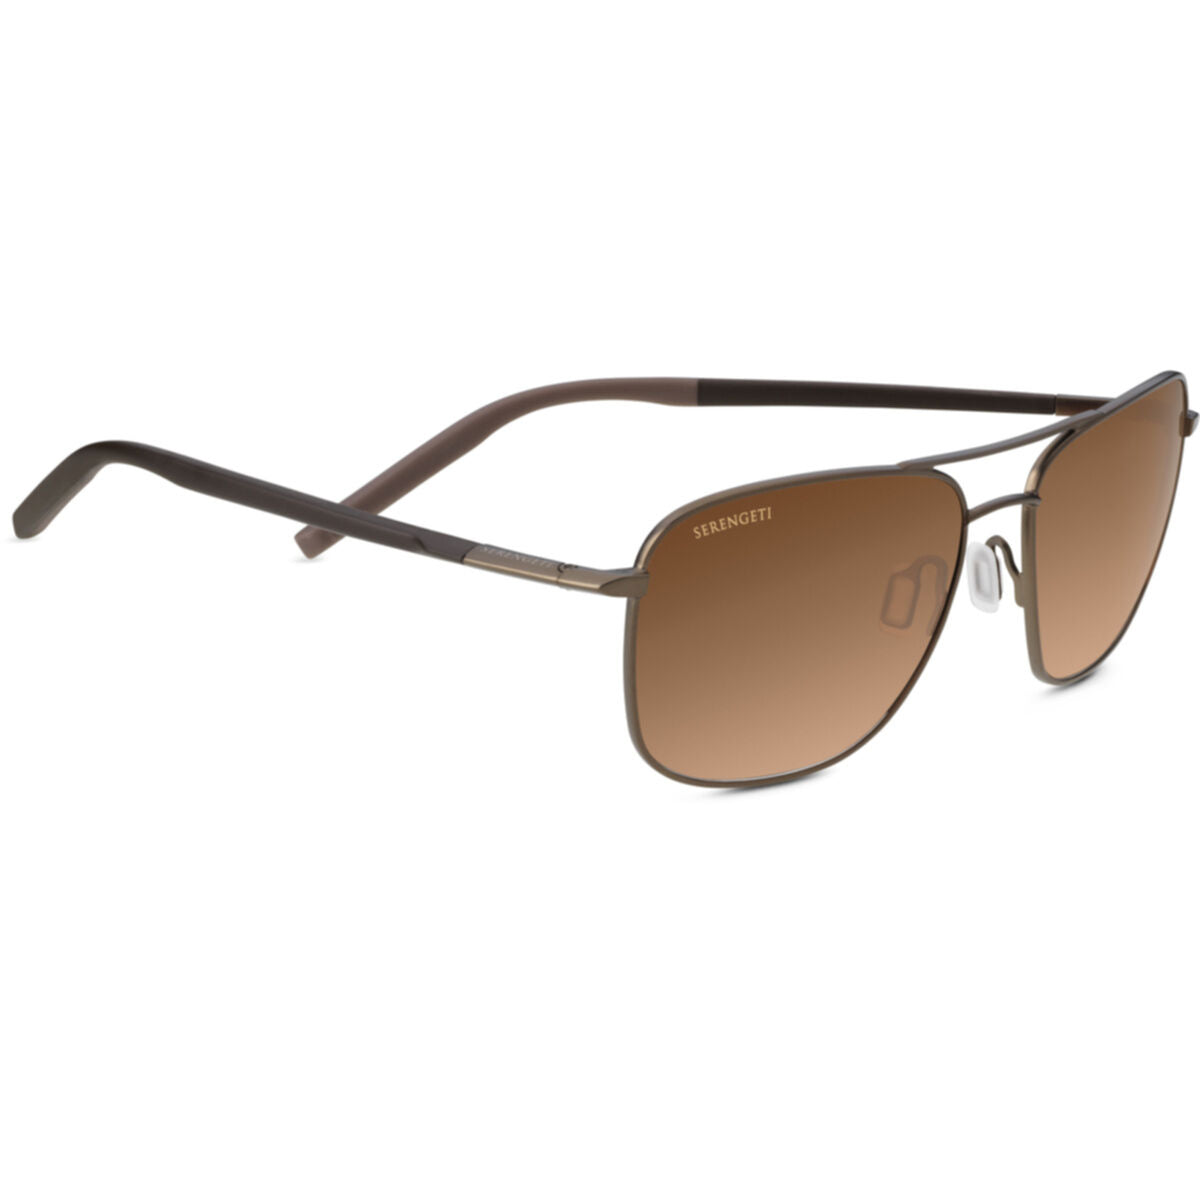 Serengeti Spello Sunglasses  Matte Espresso With Dark Brown Temples And Chocolate Brown Inside Temple Tips One Size